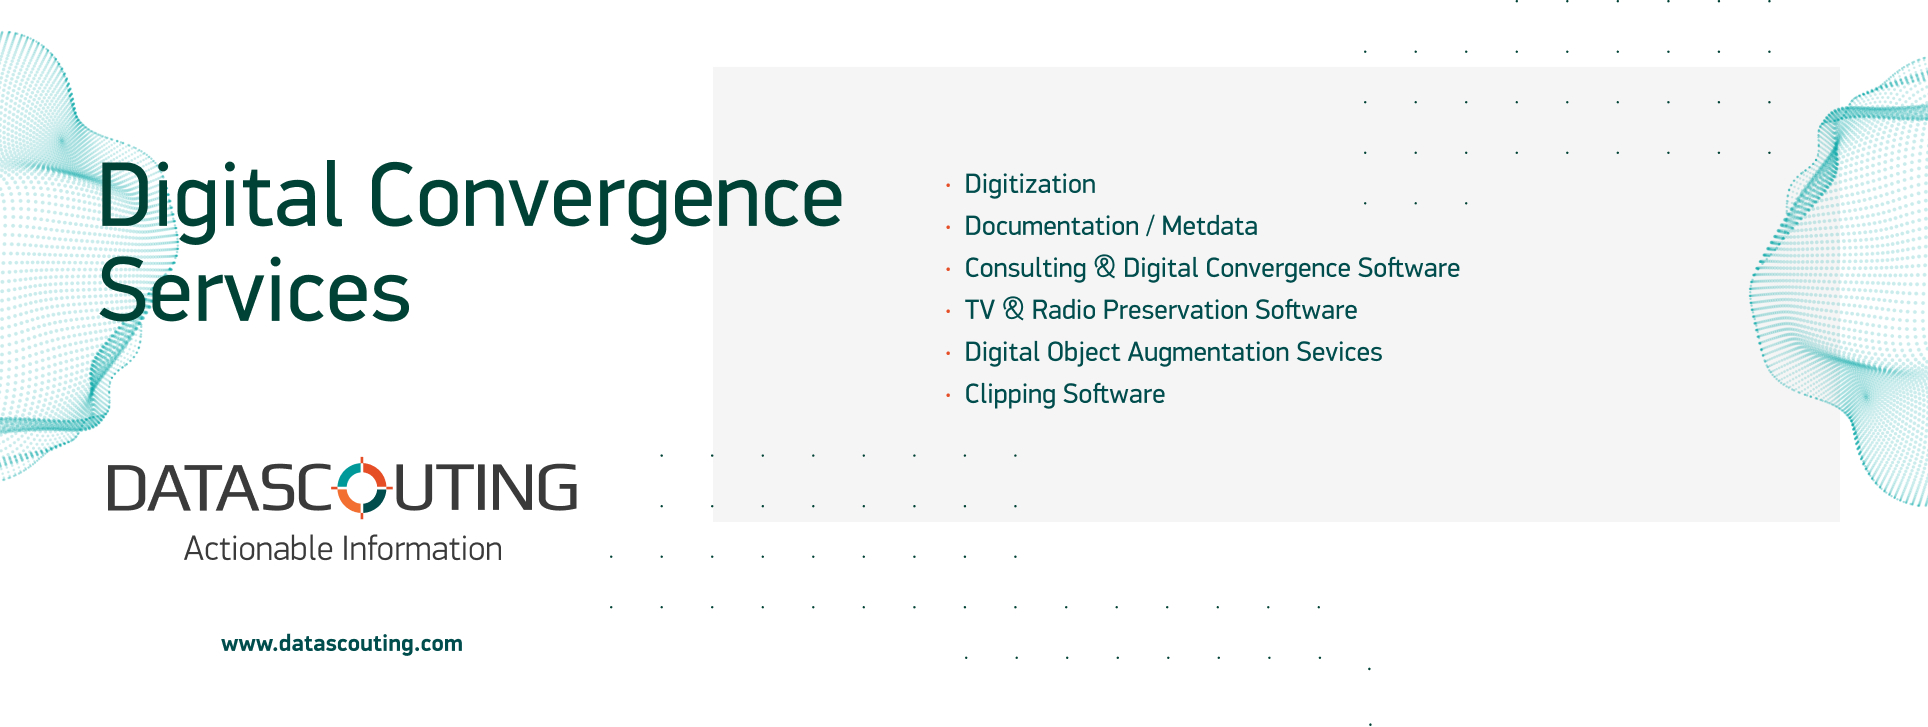 digital convergence services by DataScouting